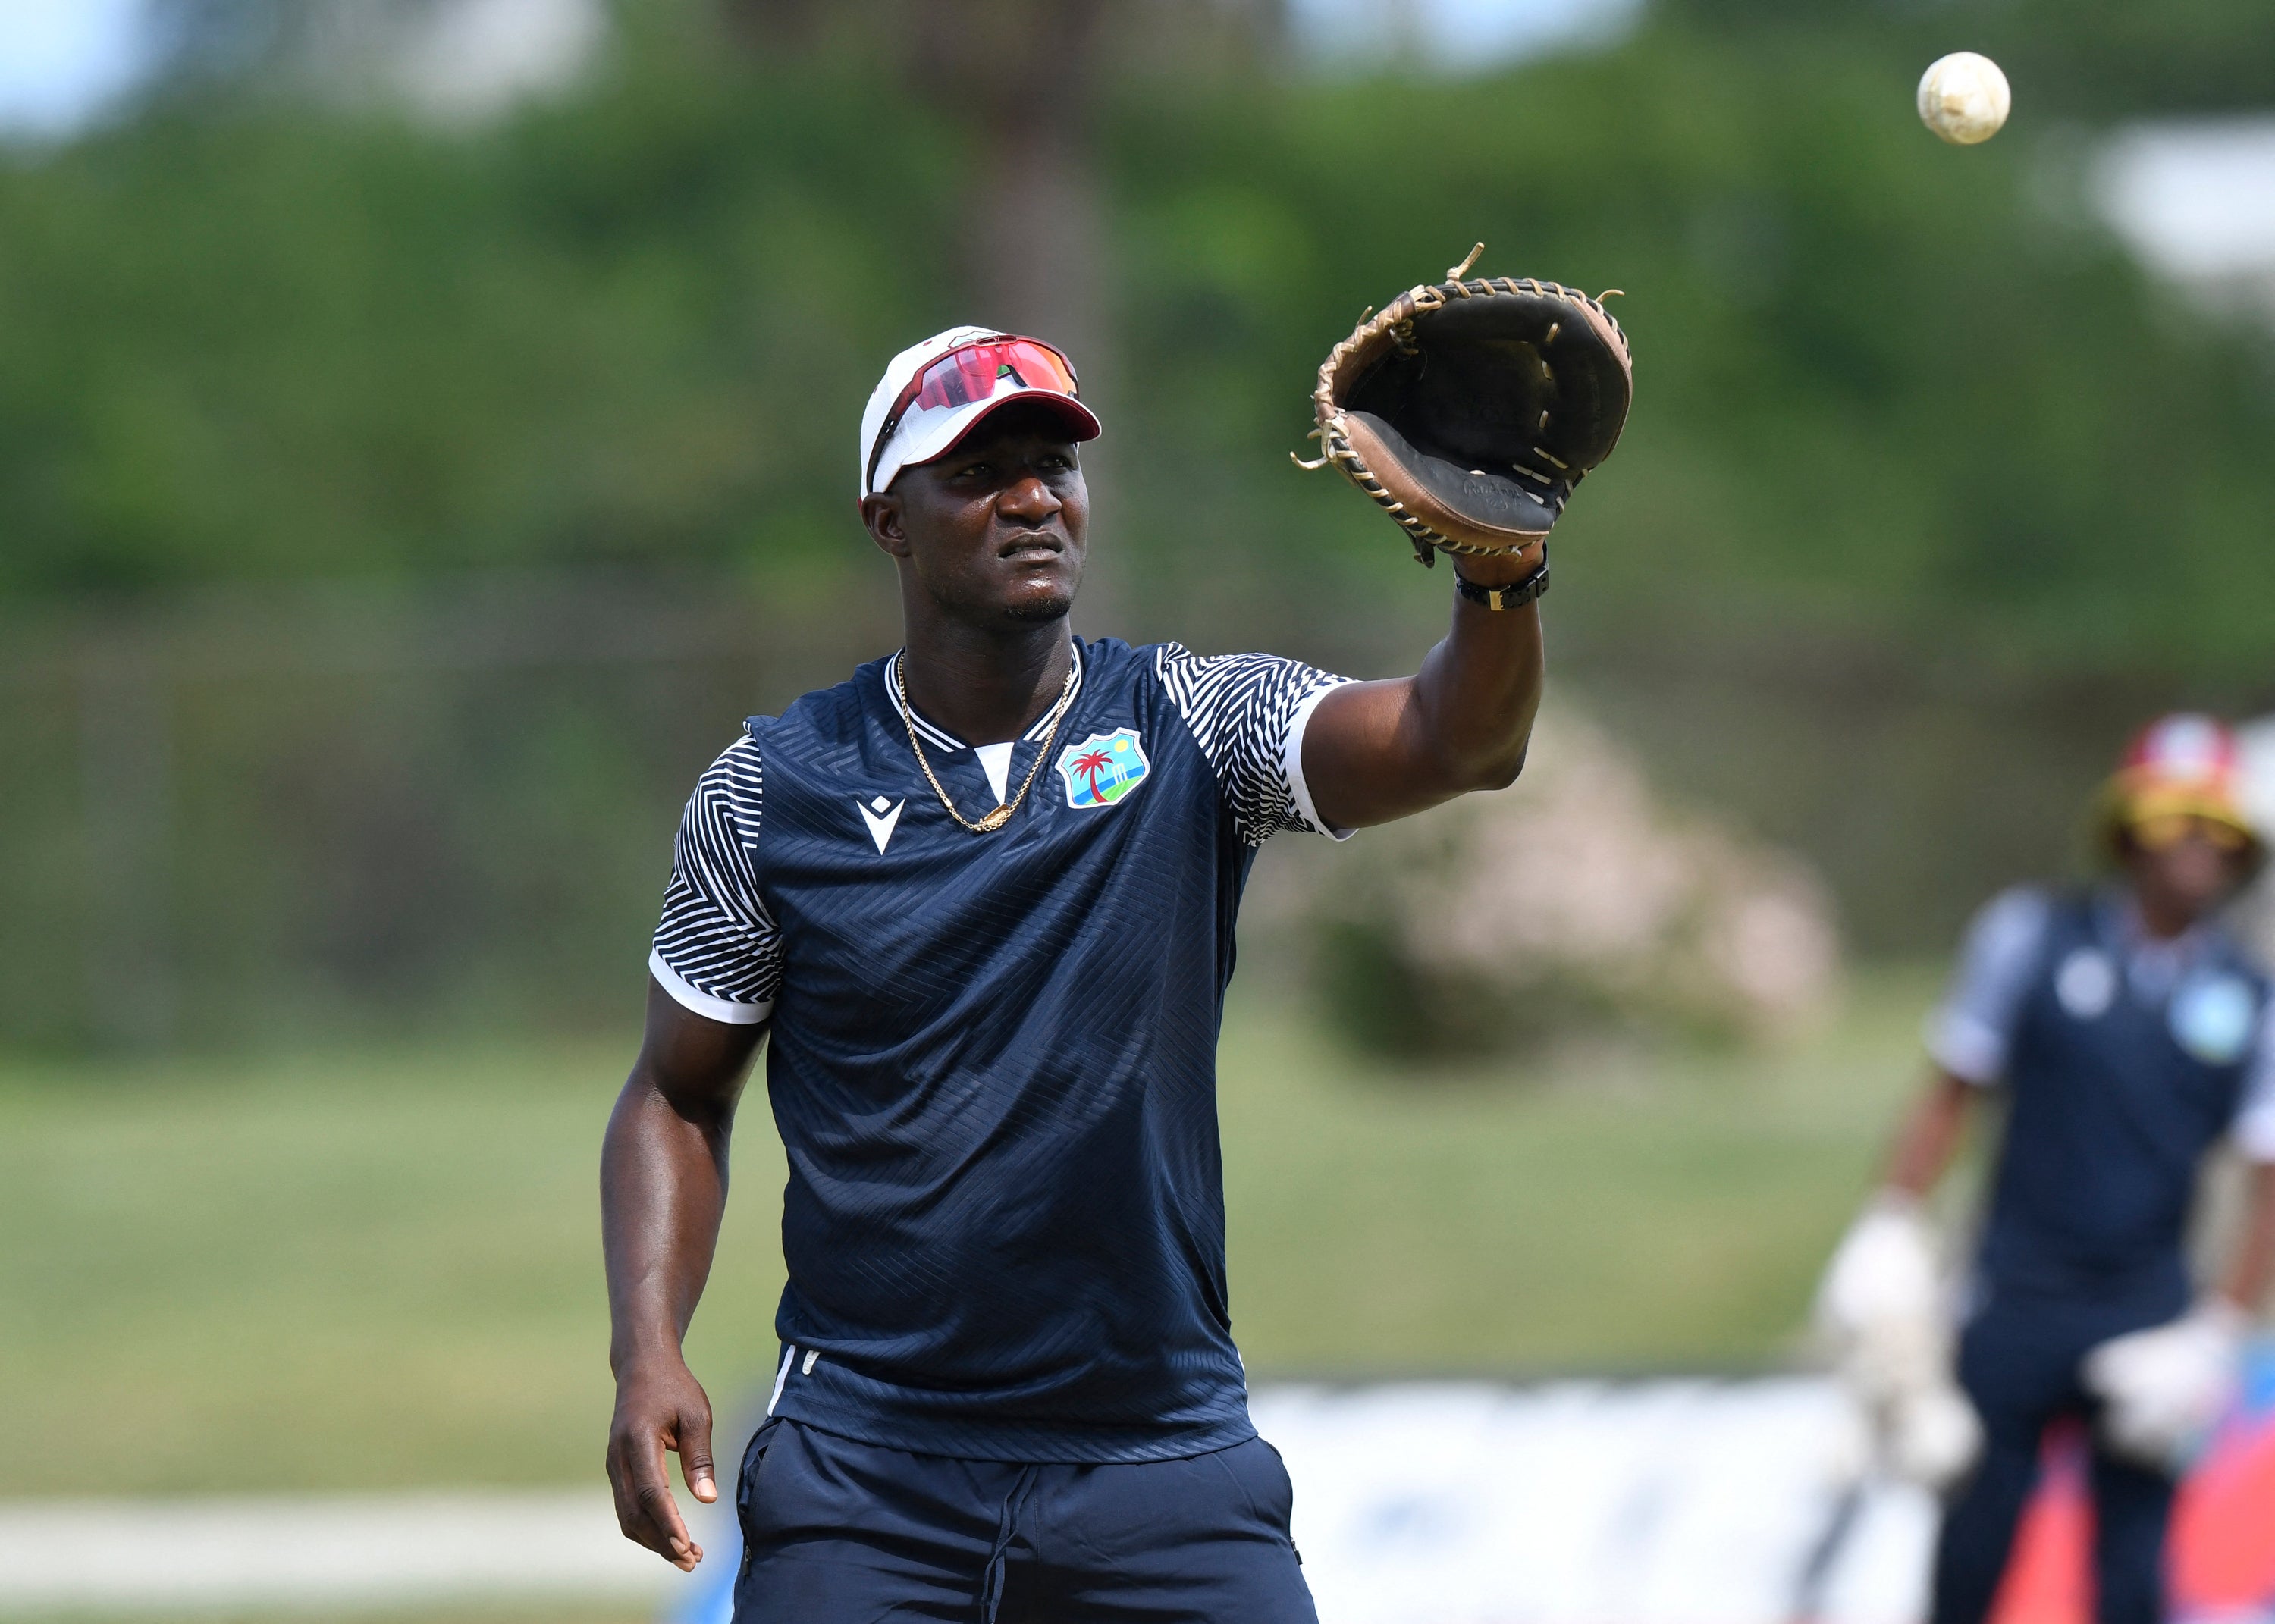 West Indies coach Daren Sammy says bowlers could have a big role to play at this summer’s T20 World Cup.